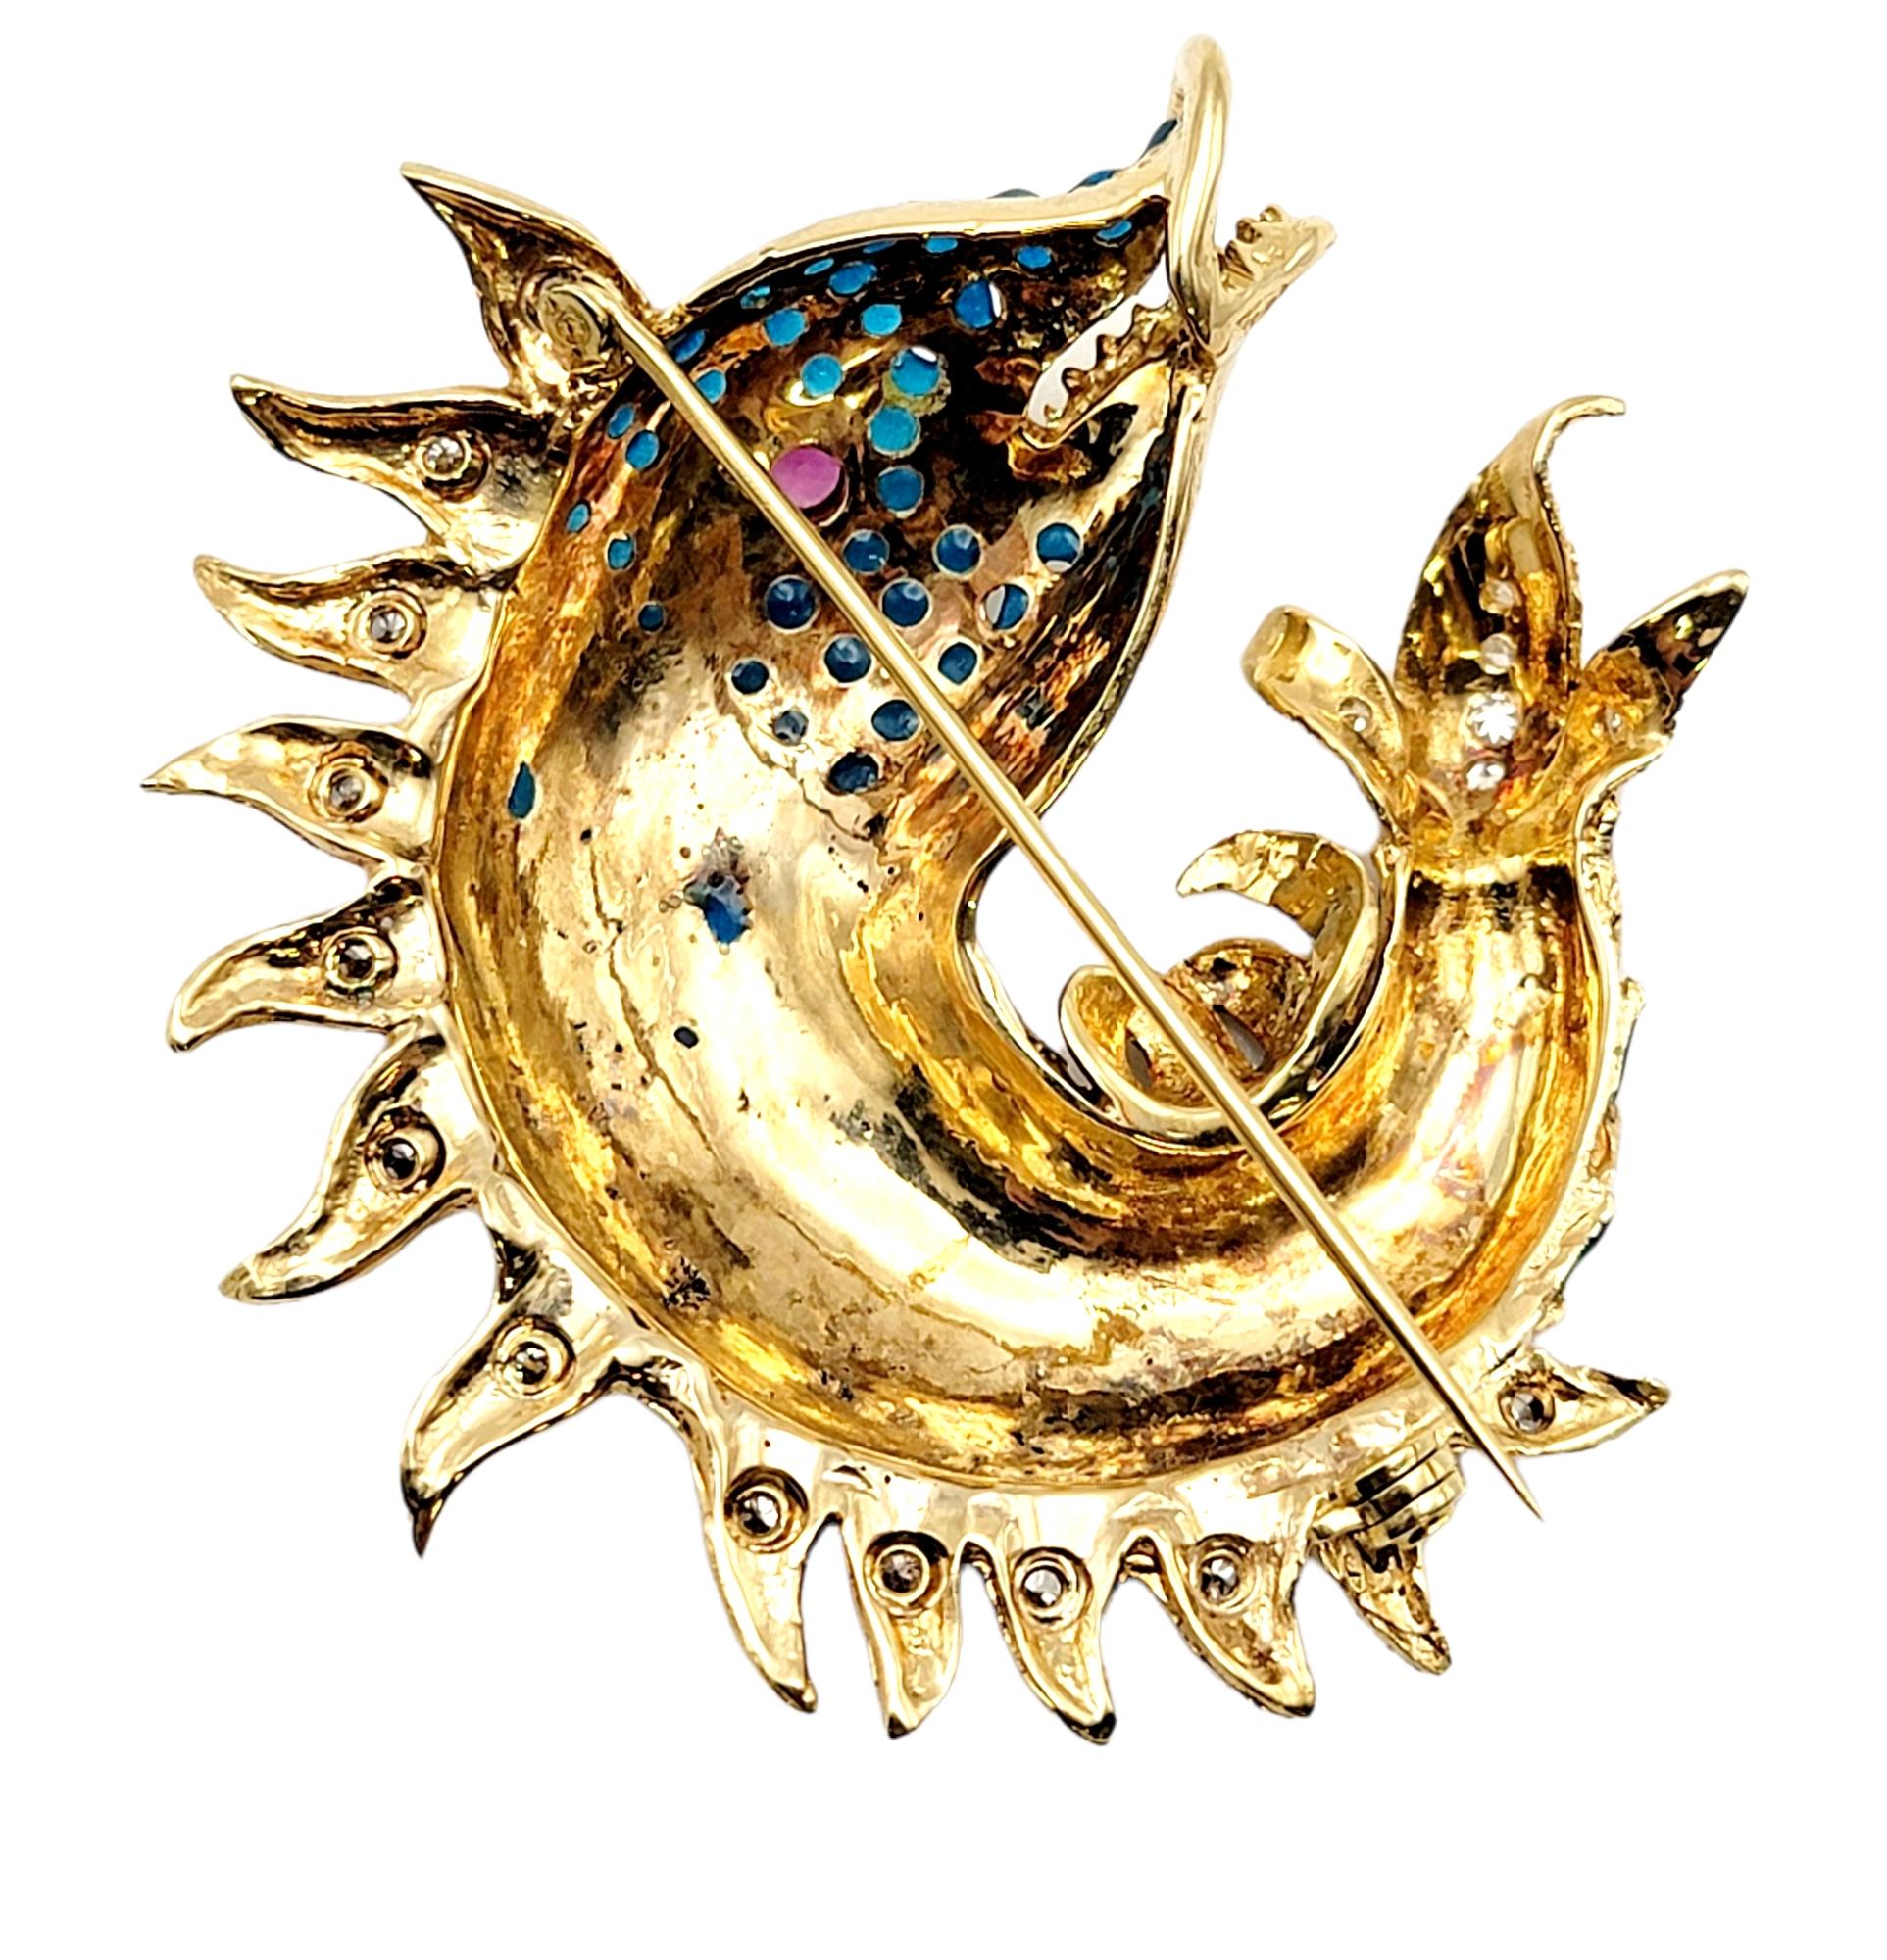 Round Cut Ornate Scaled 14 Karat Yellow Gold Fish Brooch with Diamonds, Ruby and Enamel 